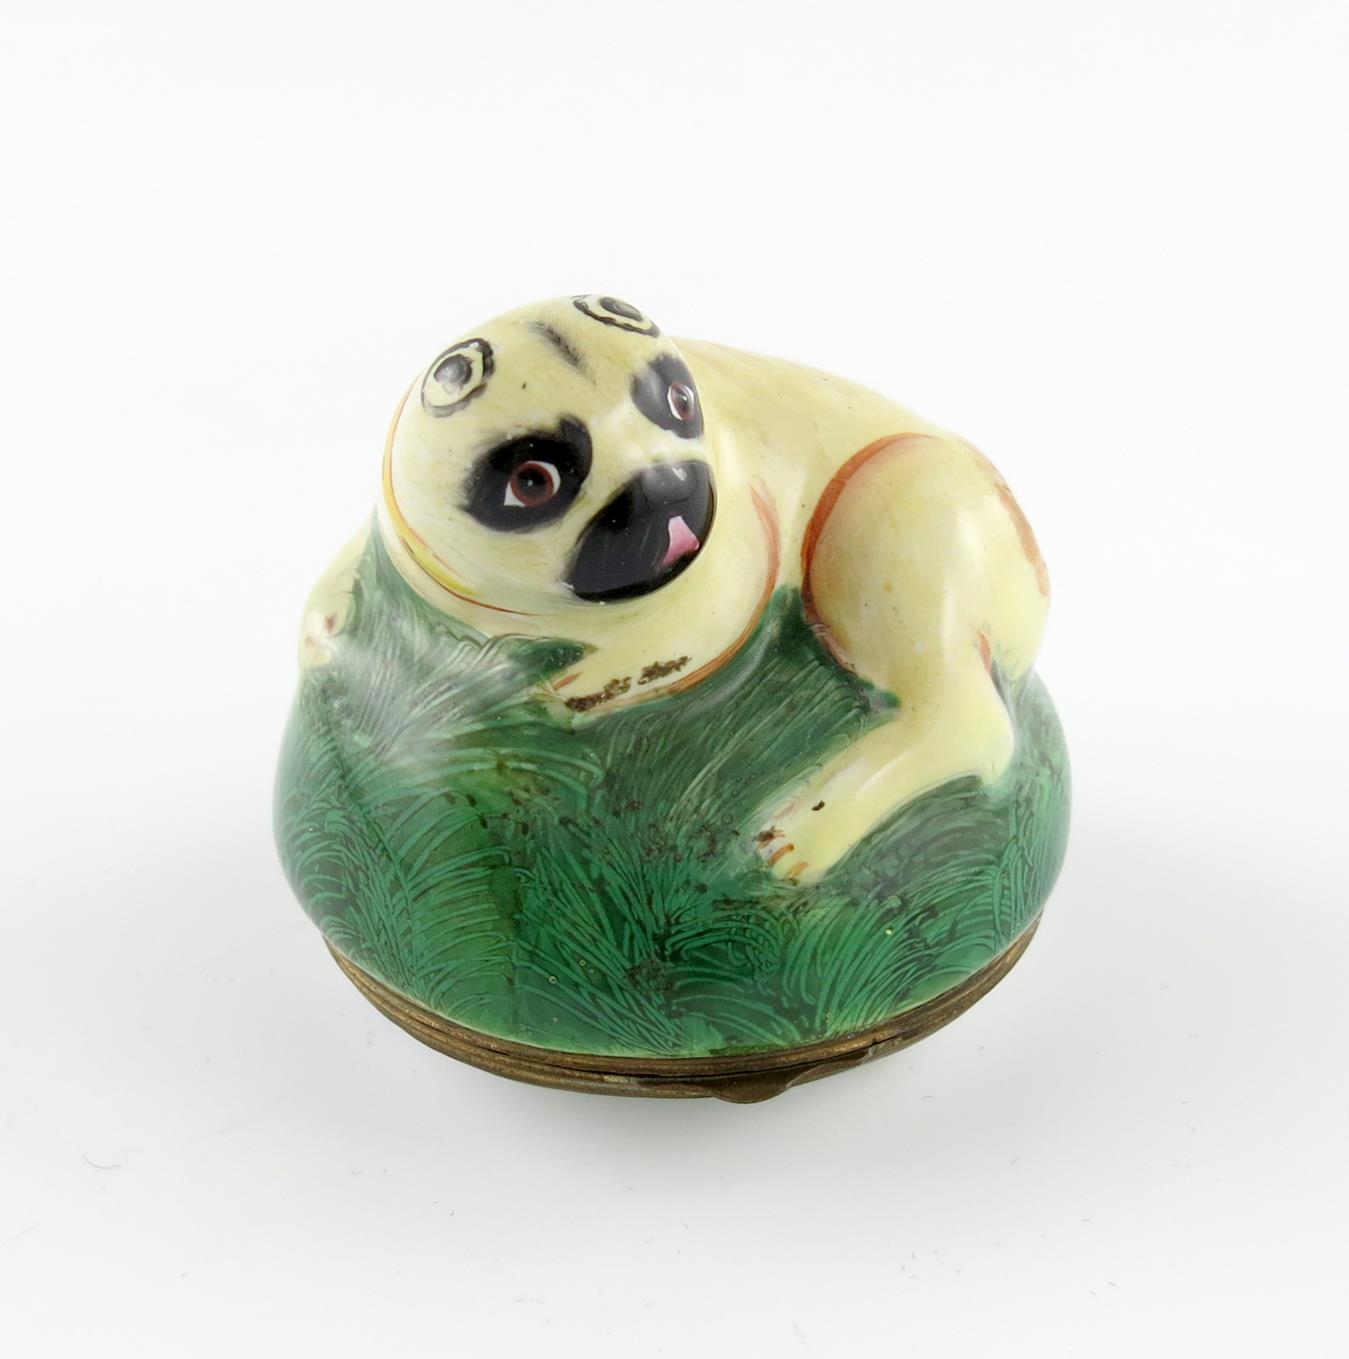 A Birmingham or South Staffordshire enamel bonbonniθre, c.1770, modelled as a pug dog curled up on a